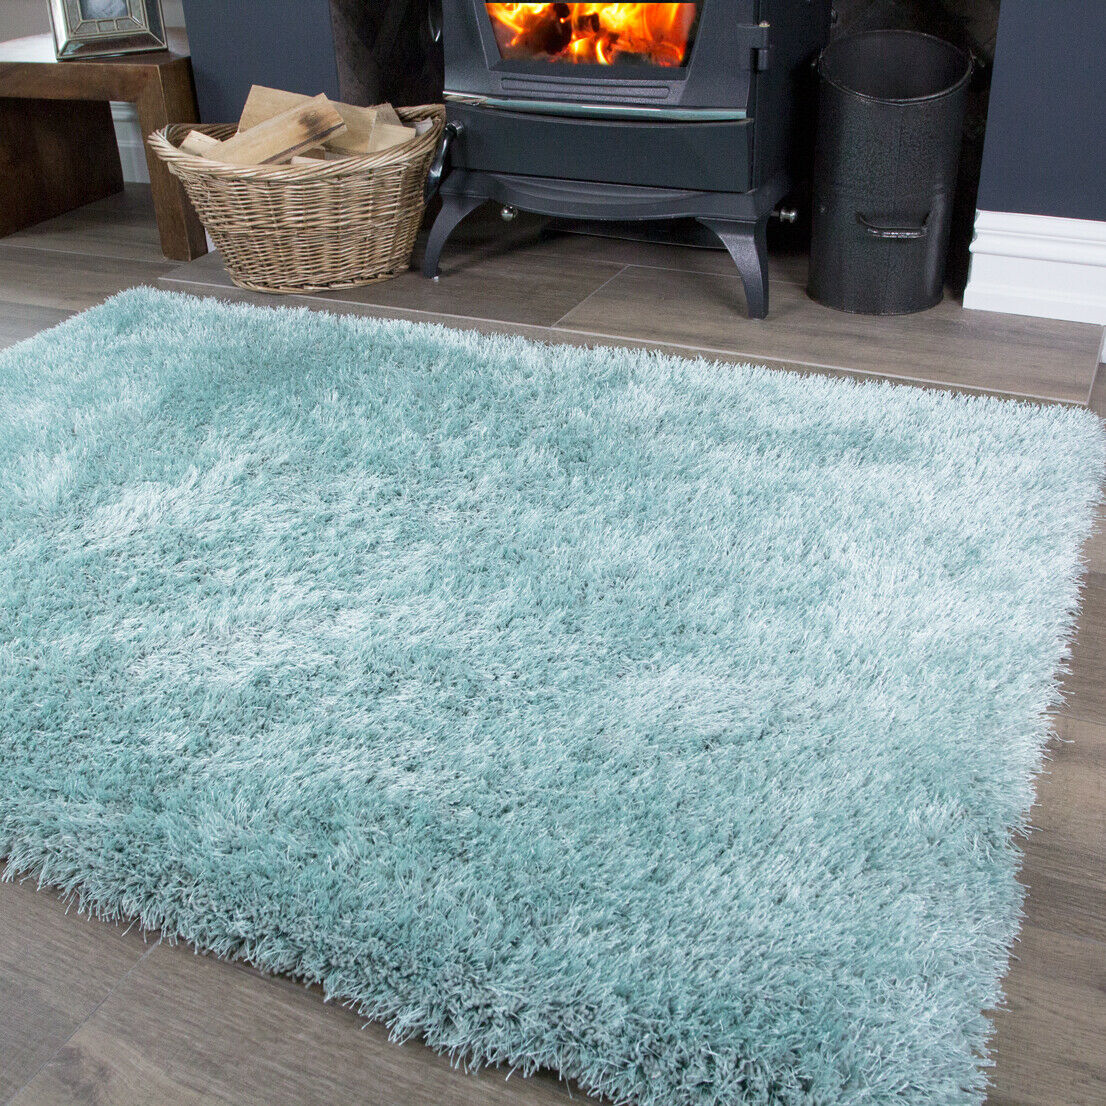 Soft Warm Shaggy Duck Egg Blue Rugs Thick Fluffy Bedroom Cosy Area Mats ...